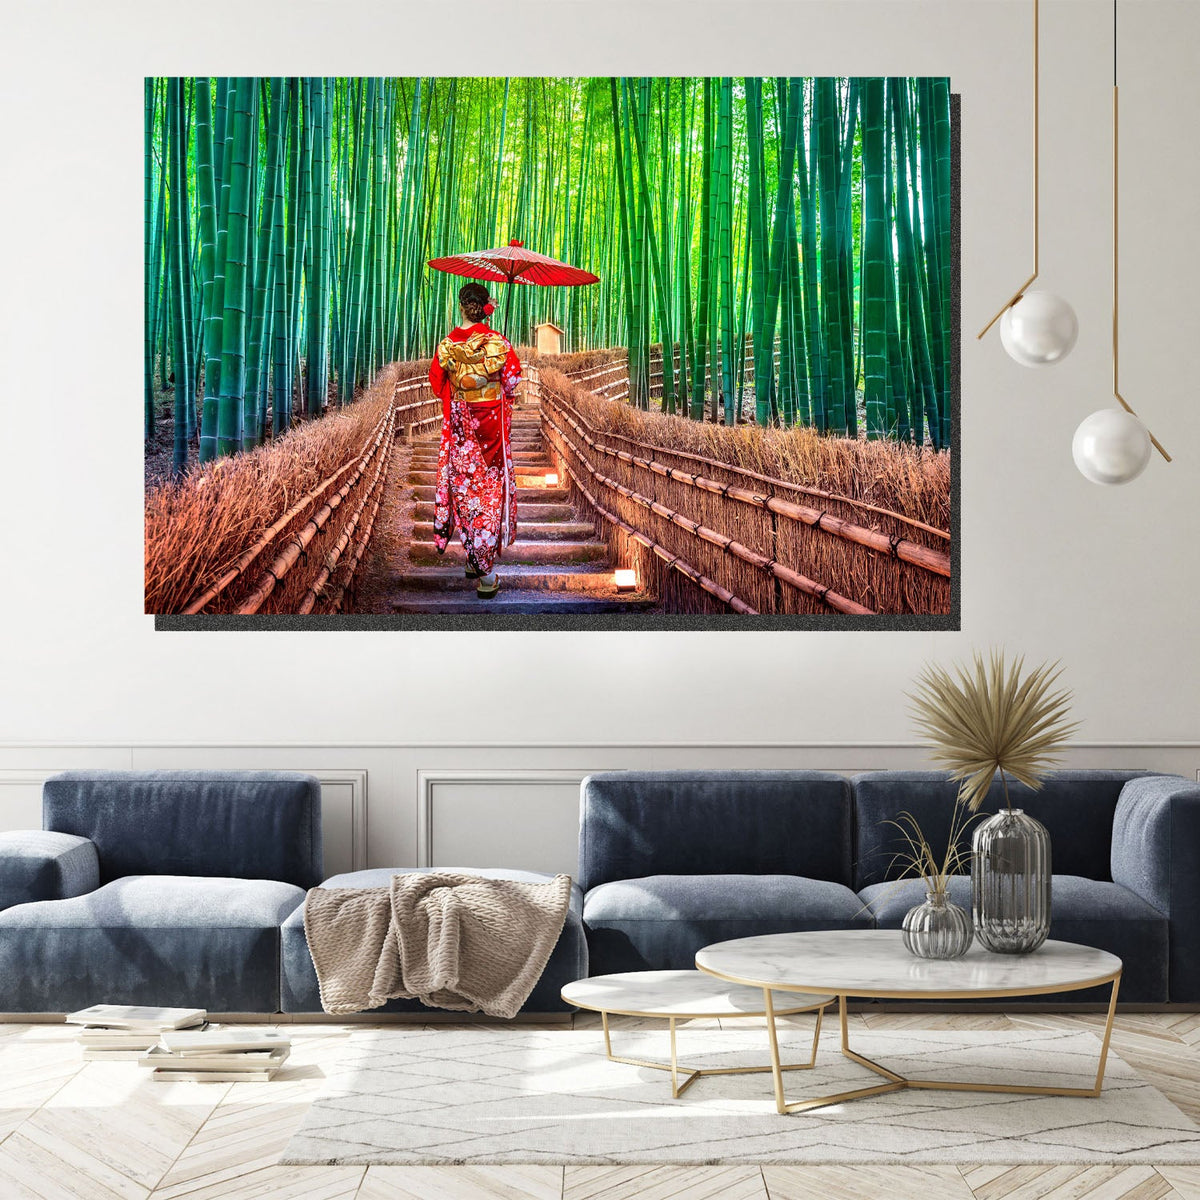 https://cdn.shopify.com/s/files/1/0387/9986/8044/products/KyotoBambooForestCanvasArtprintStretched-2.jpg